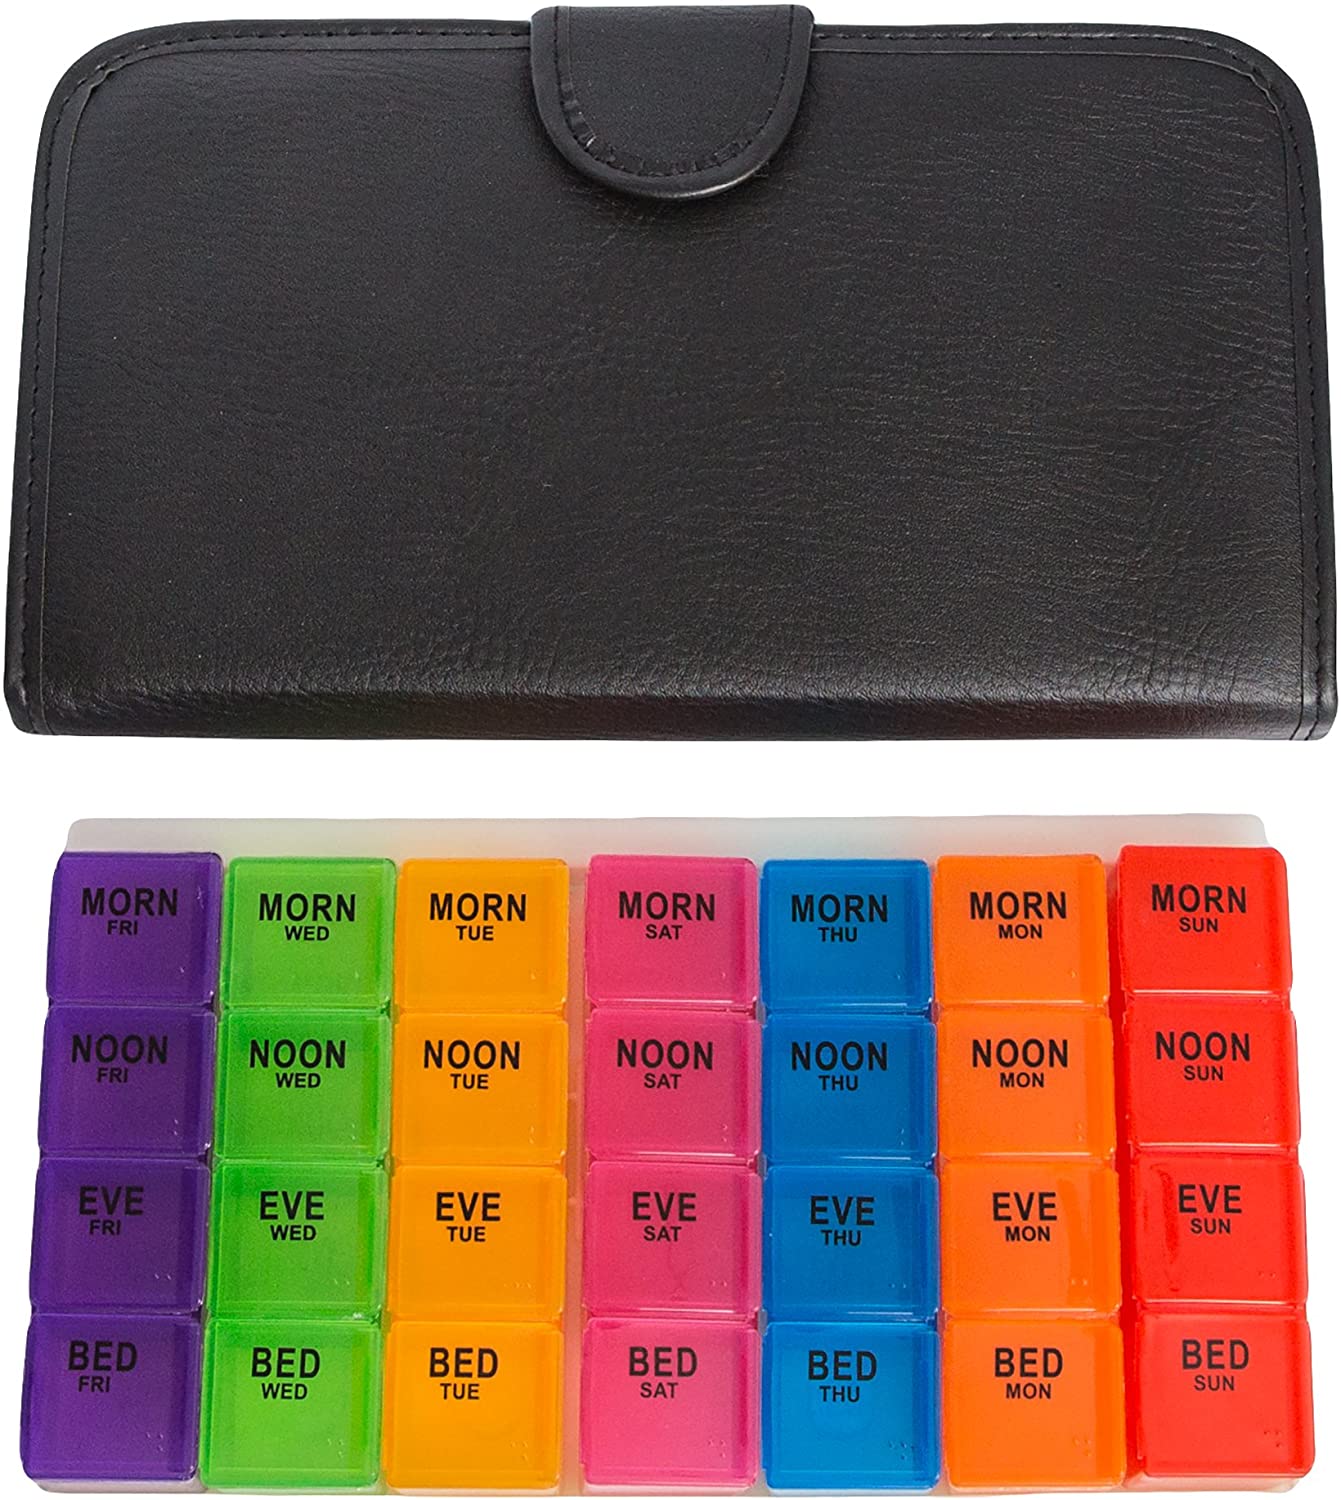 Cute Travel Medication Reminder Daily AM PM, Day Night 7 Compartments-Includes Black Leather PU Carrying Case